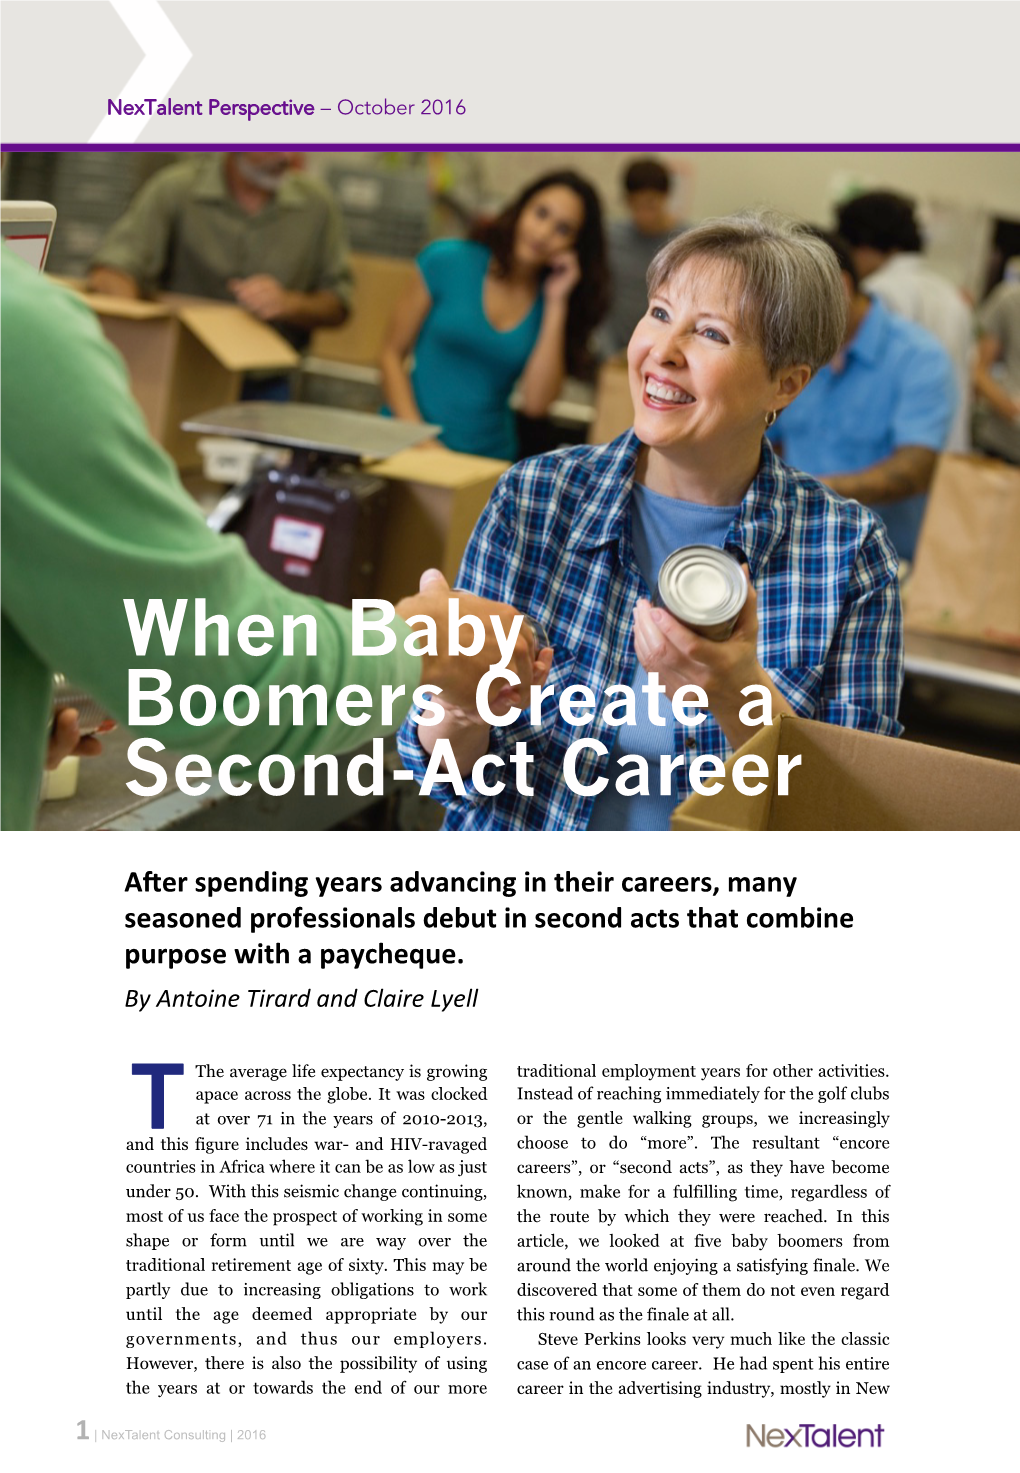 When Baby Boomers Create a Second-Act Career